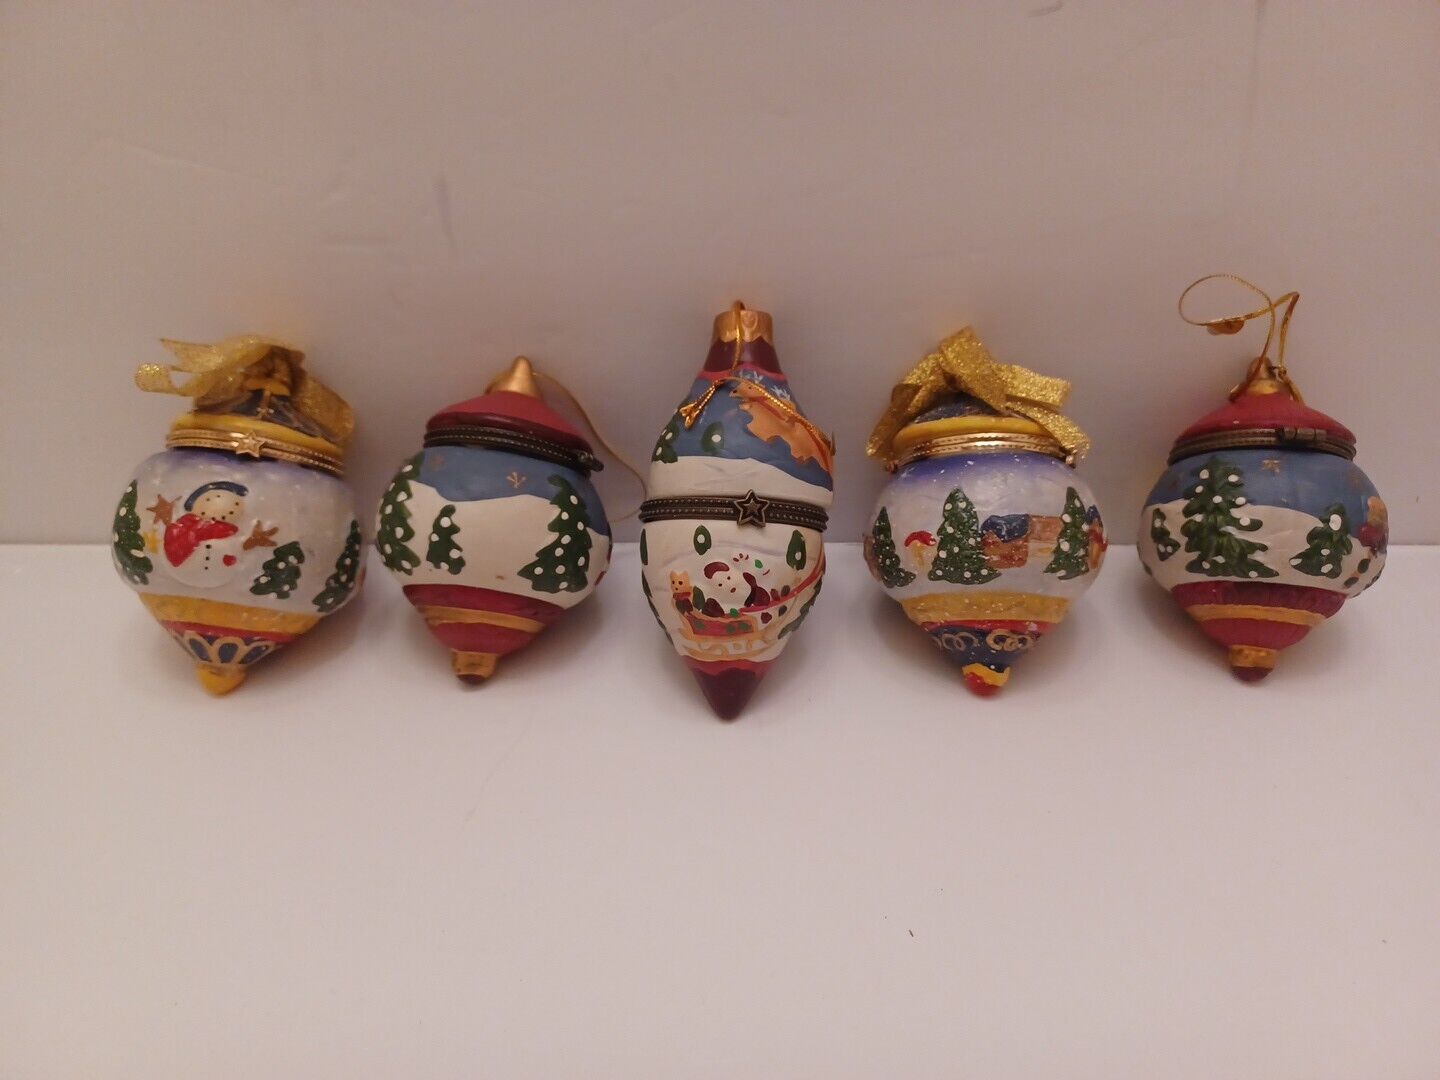 LOT OF 5 HEAVY Porcelin Christmas Ornaments That Open Up To Hold Small Gifts